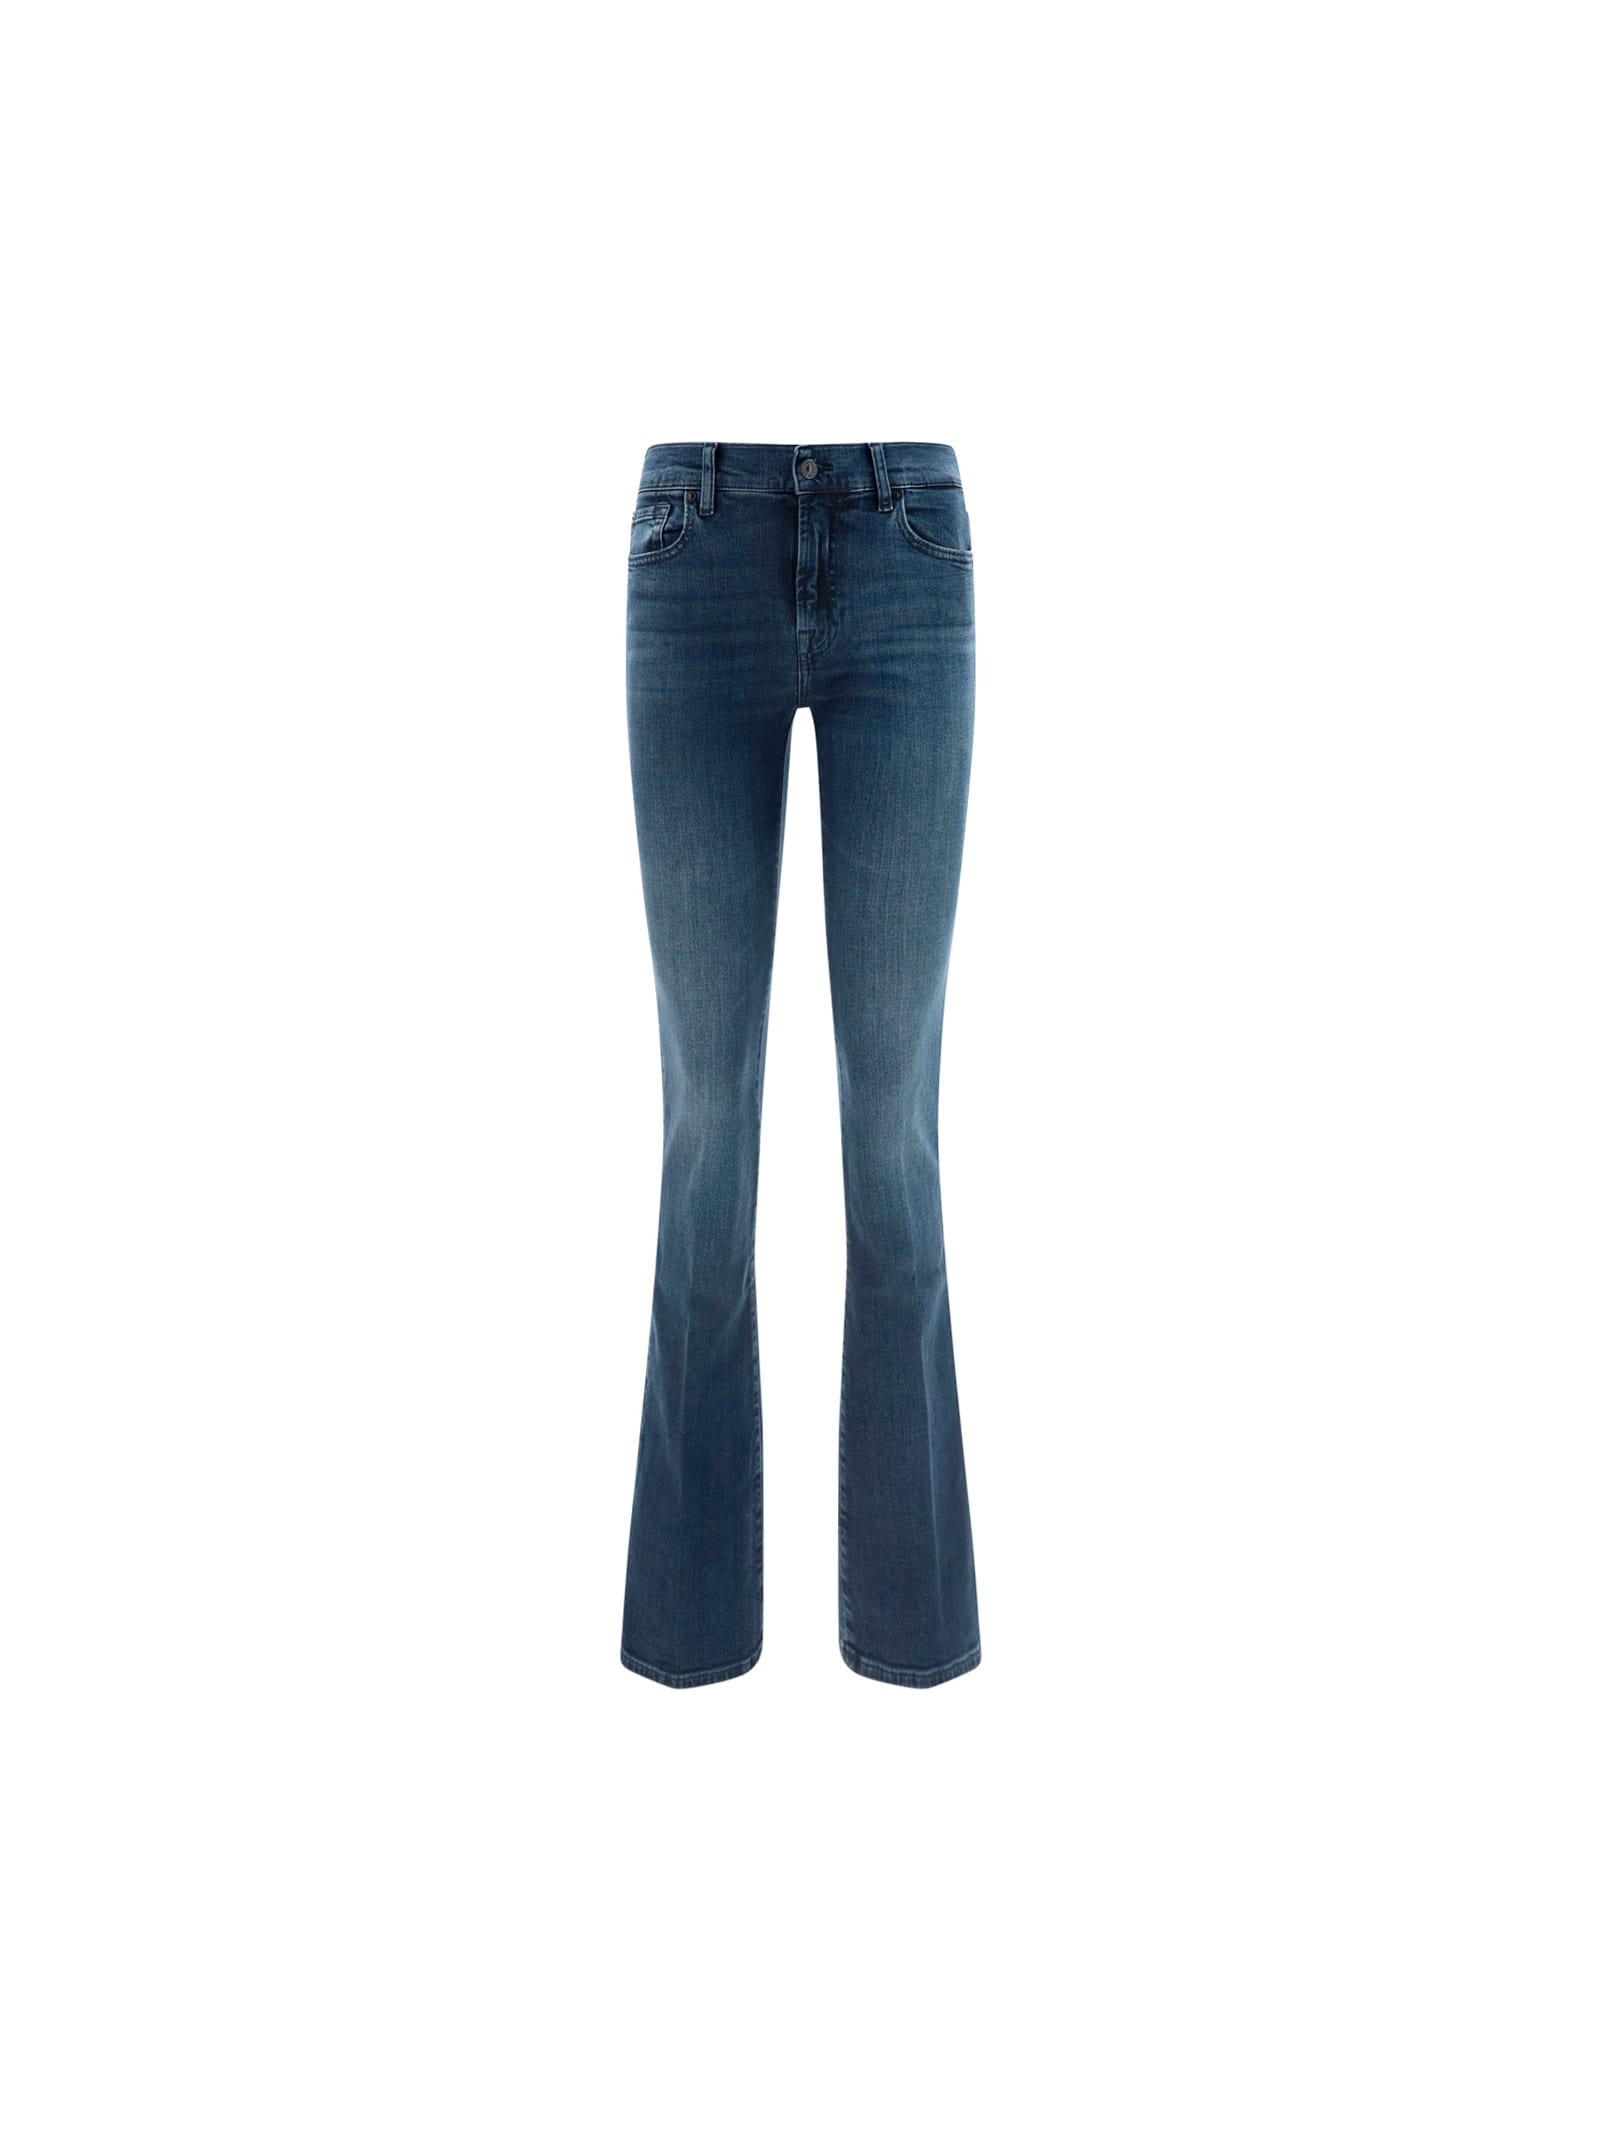 7 For All Mankind Slim Illusion Jeans